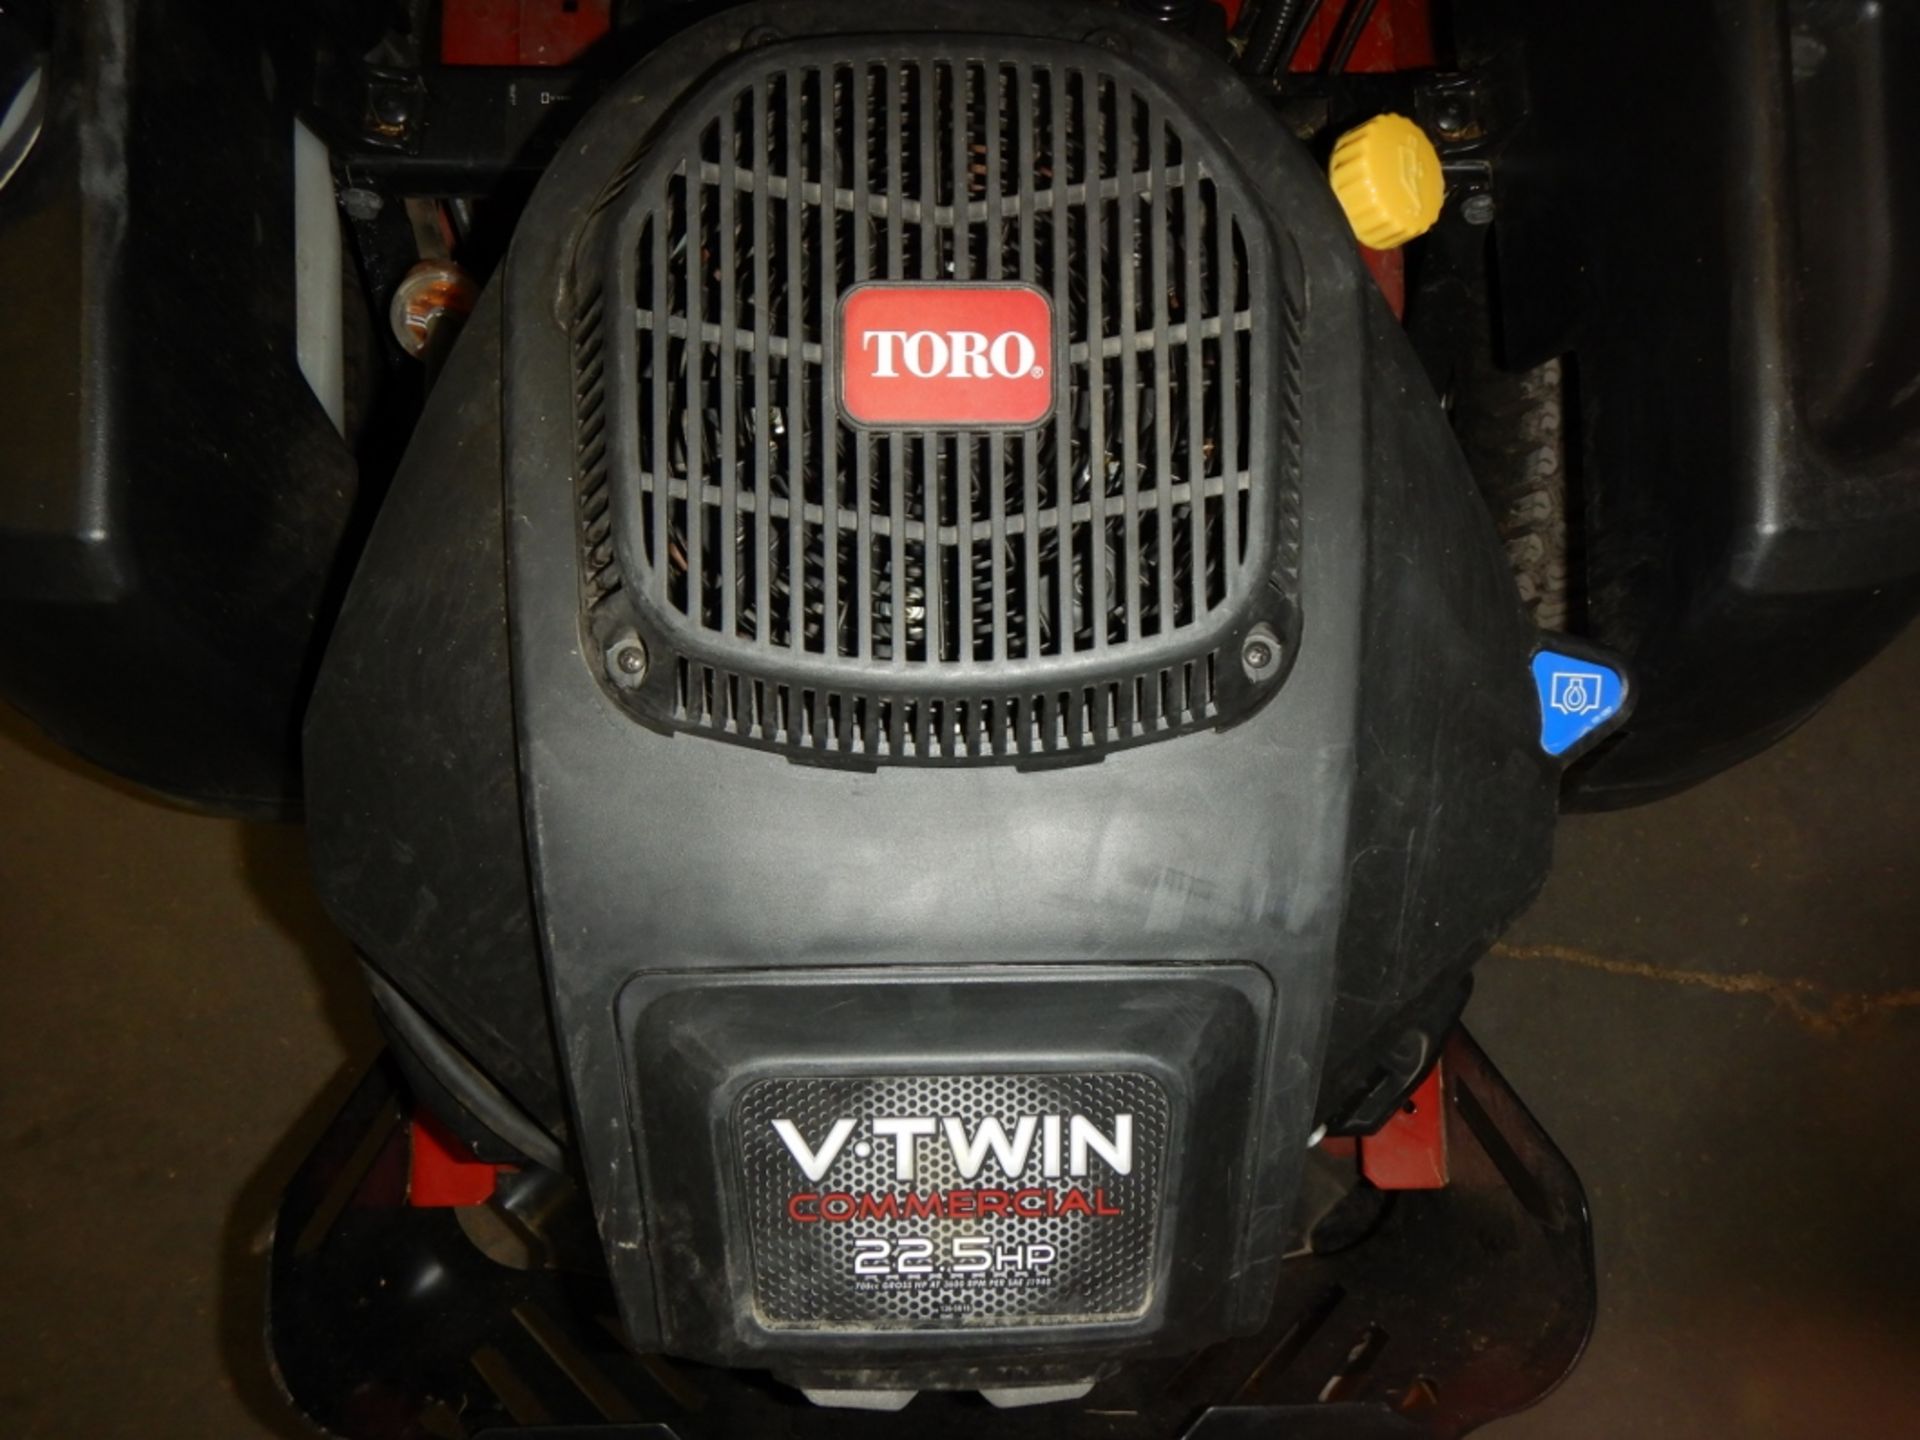 2018 TORO TIME CUTTER MX4200 RIDING MOWER, W/ 42" MOWER, SMART SPEED CONTROL - GREAT CONDITION - Image 11 of 15